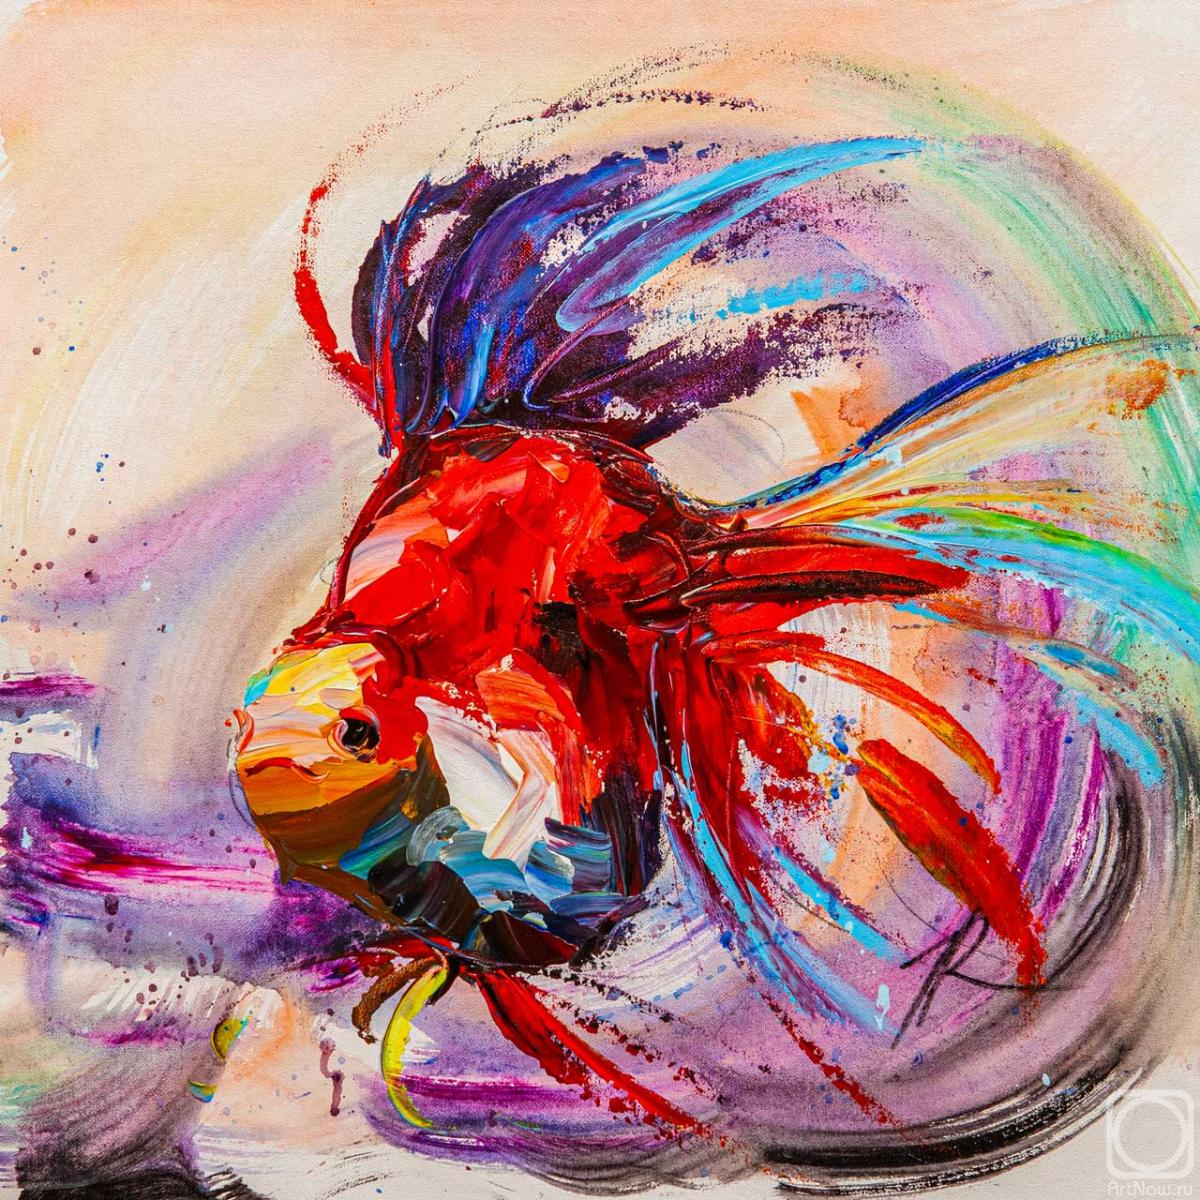 Rodries Jose. Goldfish for the fulfillment of desires N19